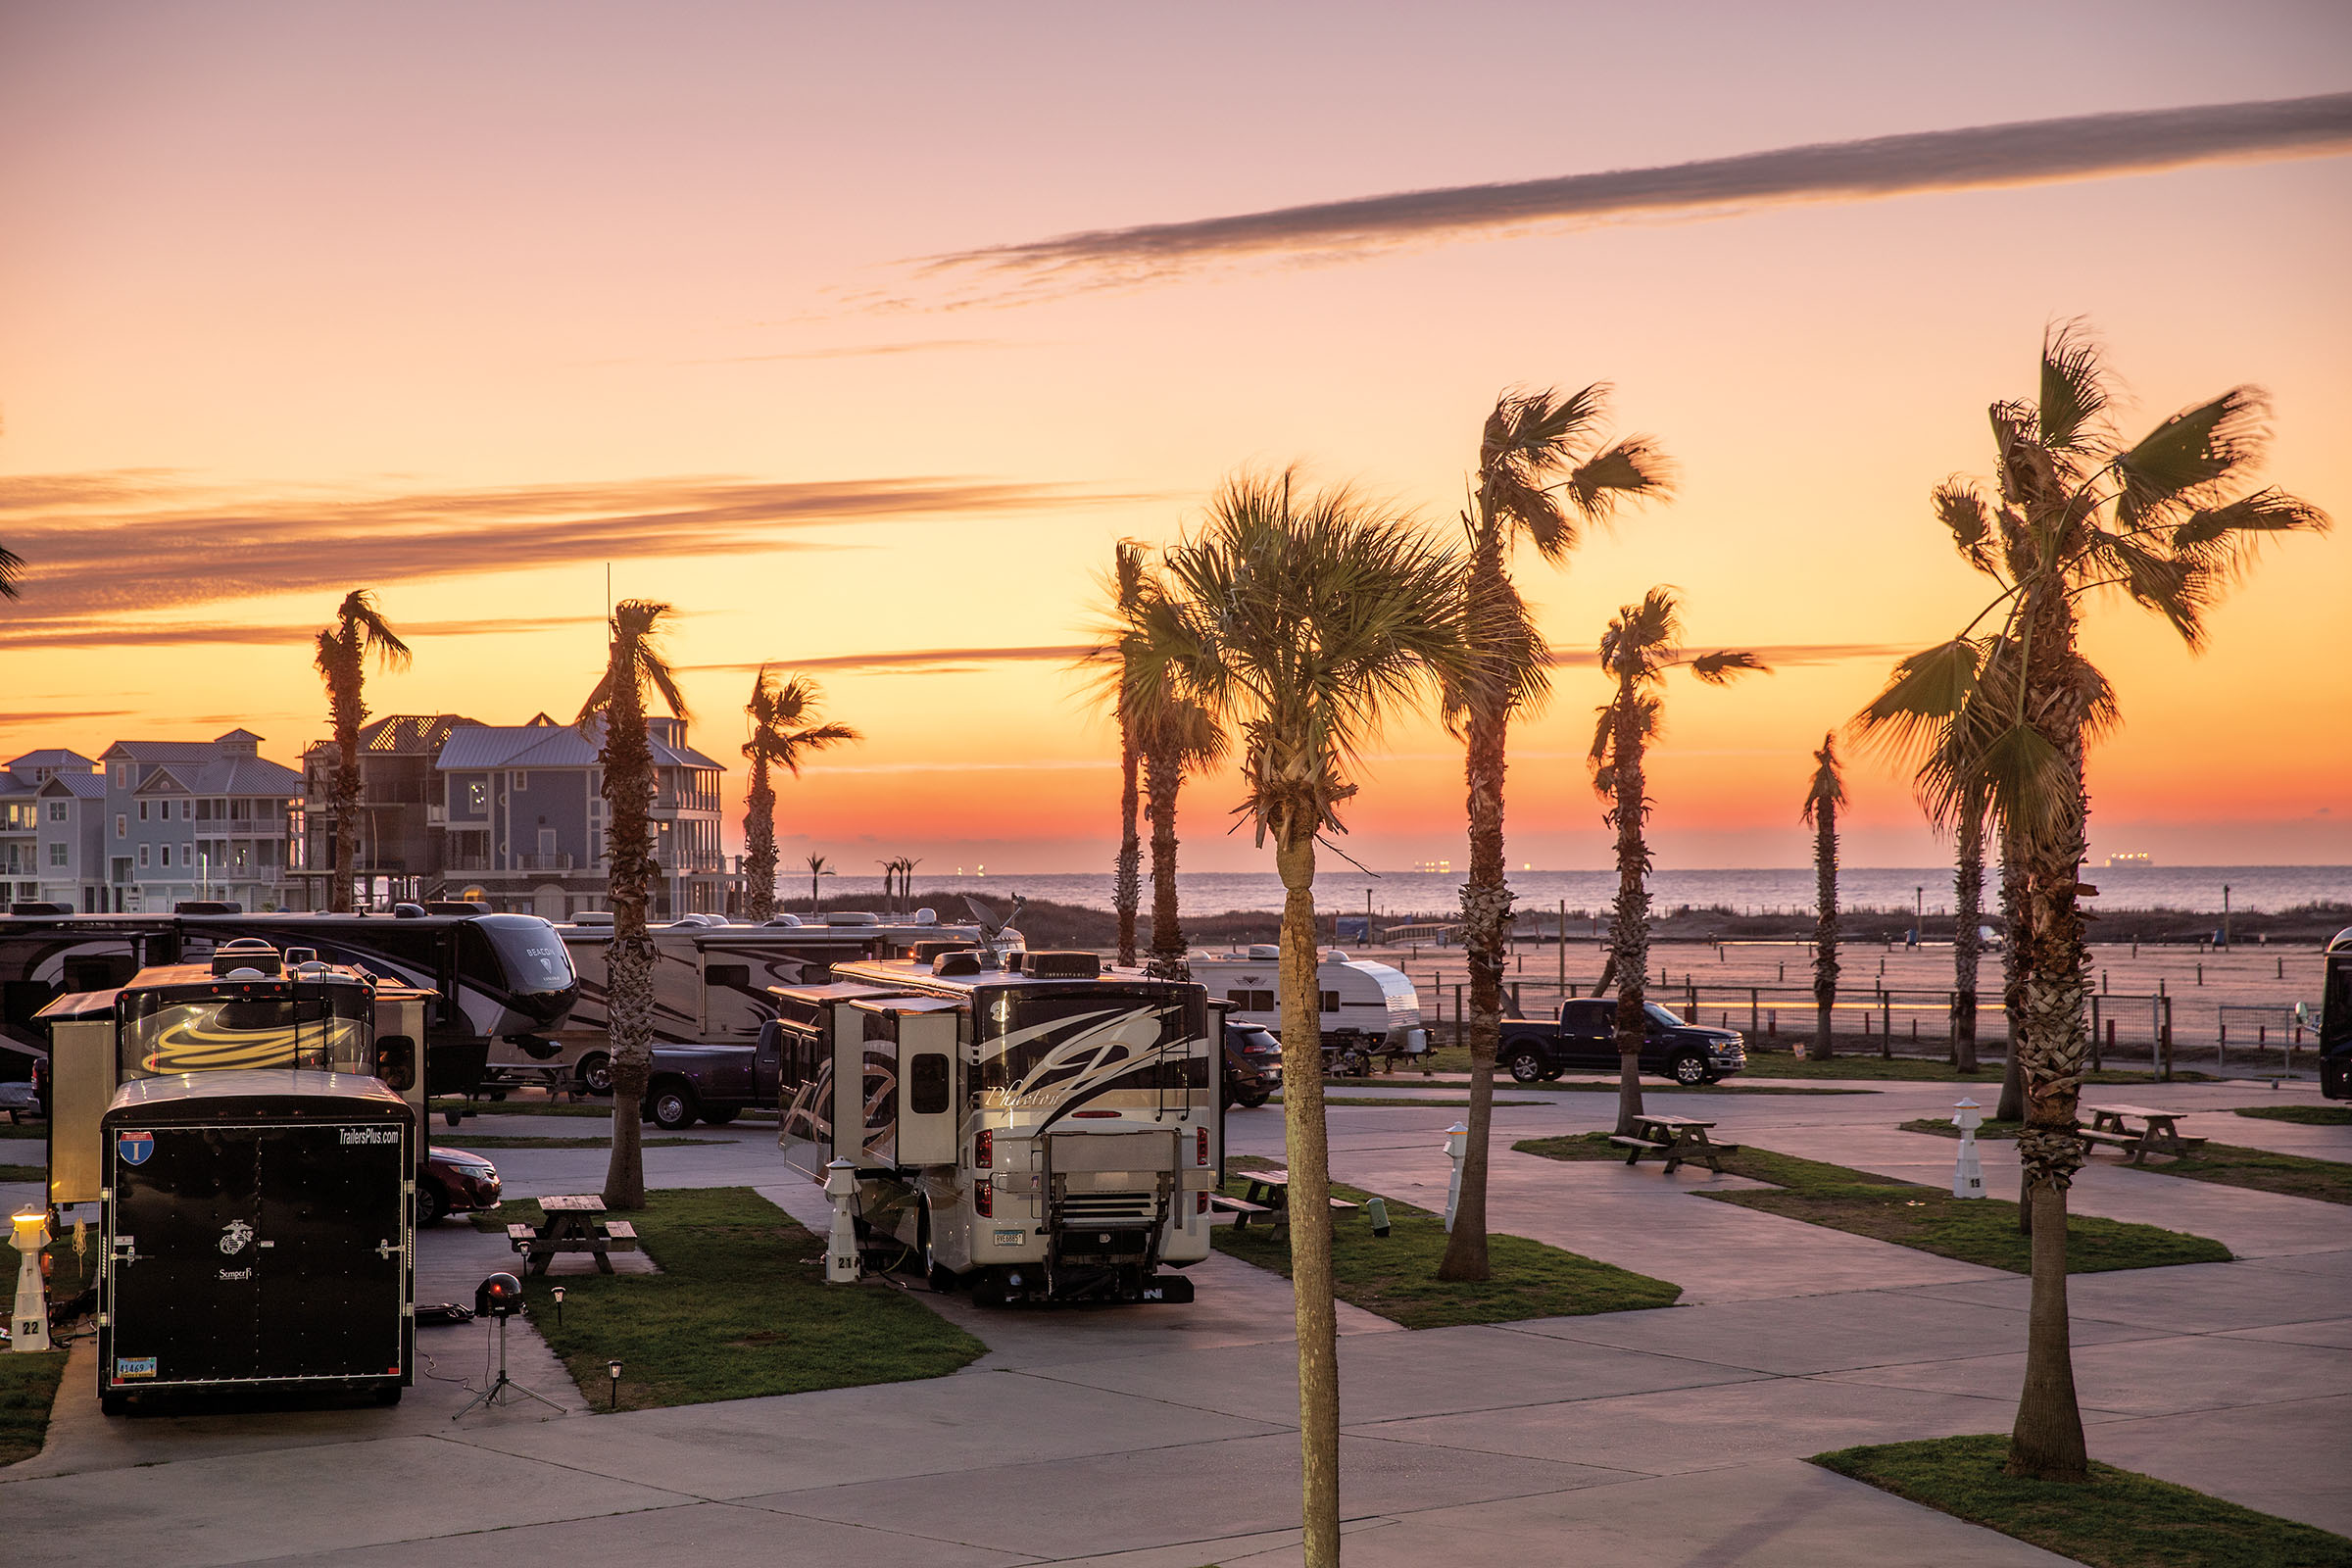 A group of RVs parked underneath palm trees in a golden sunrise